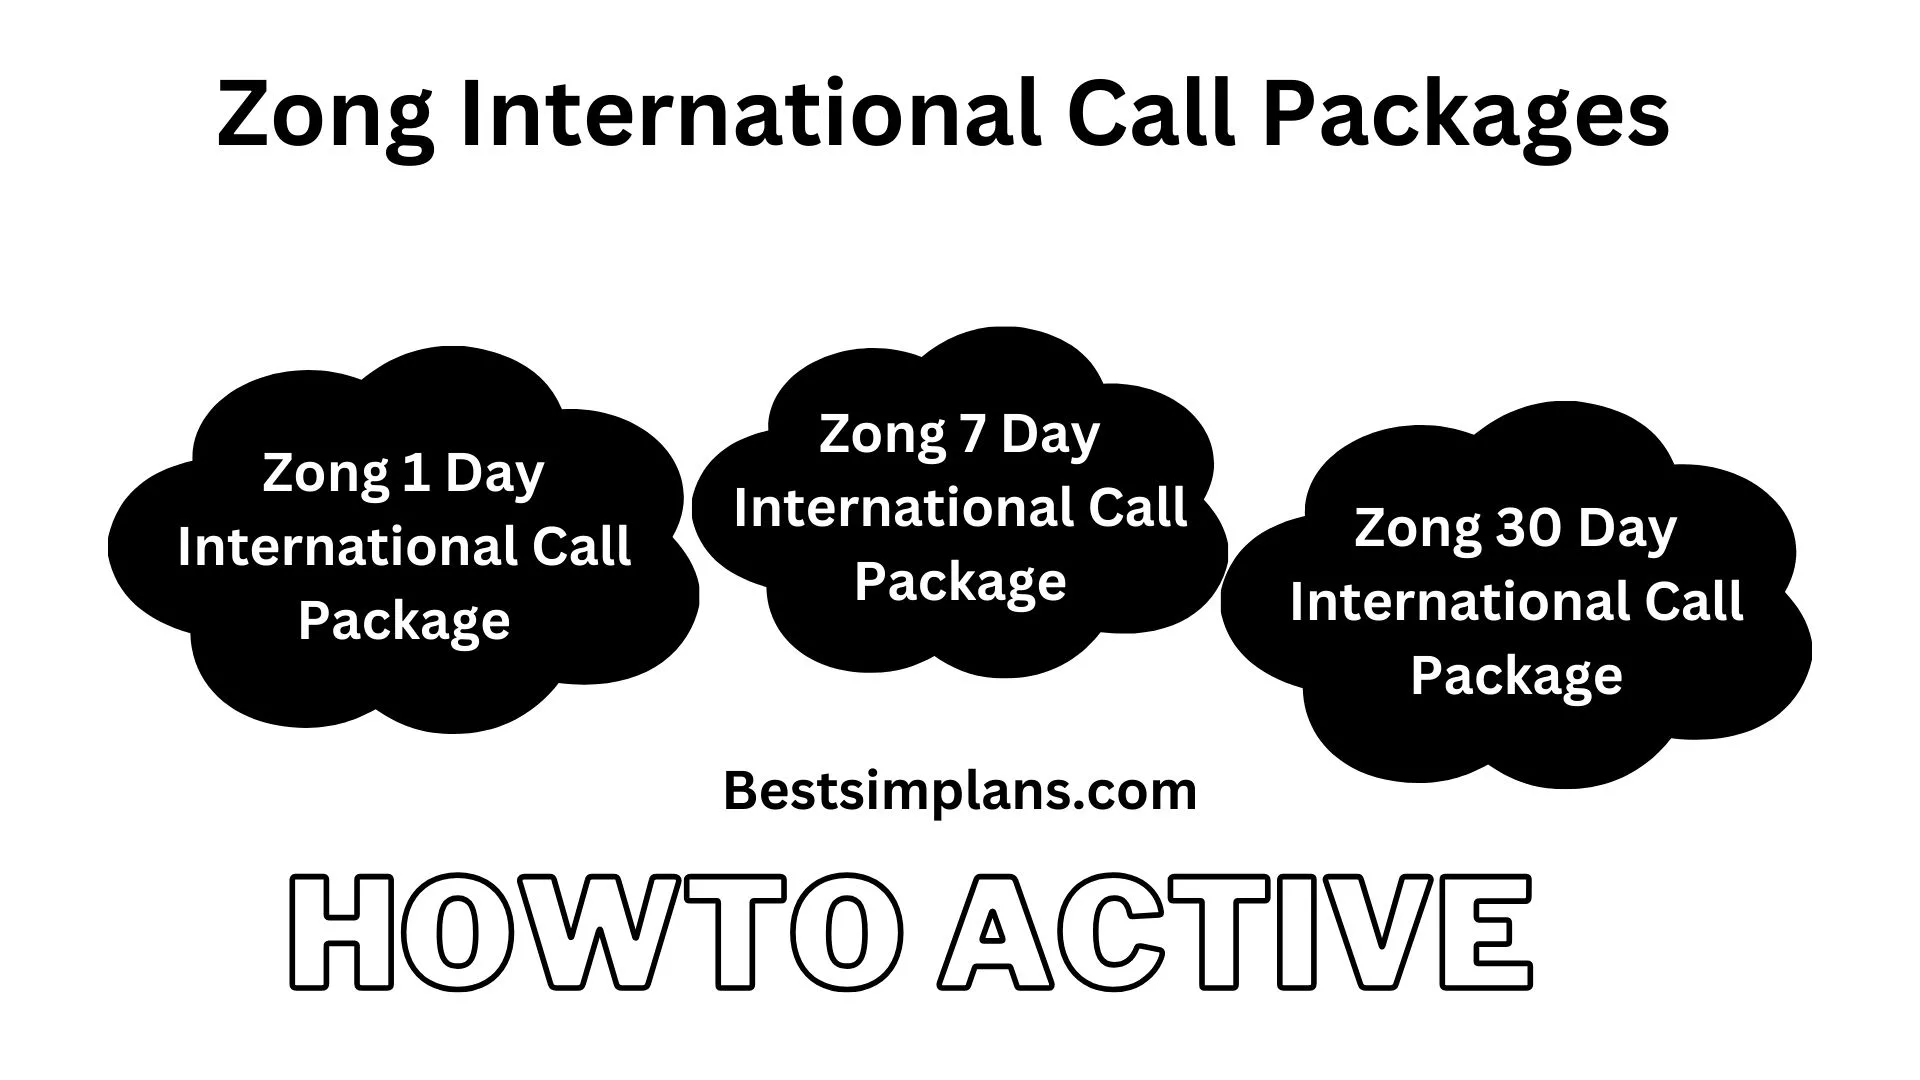 Zong International Call Packages